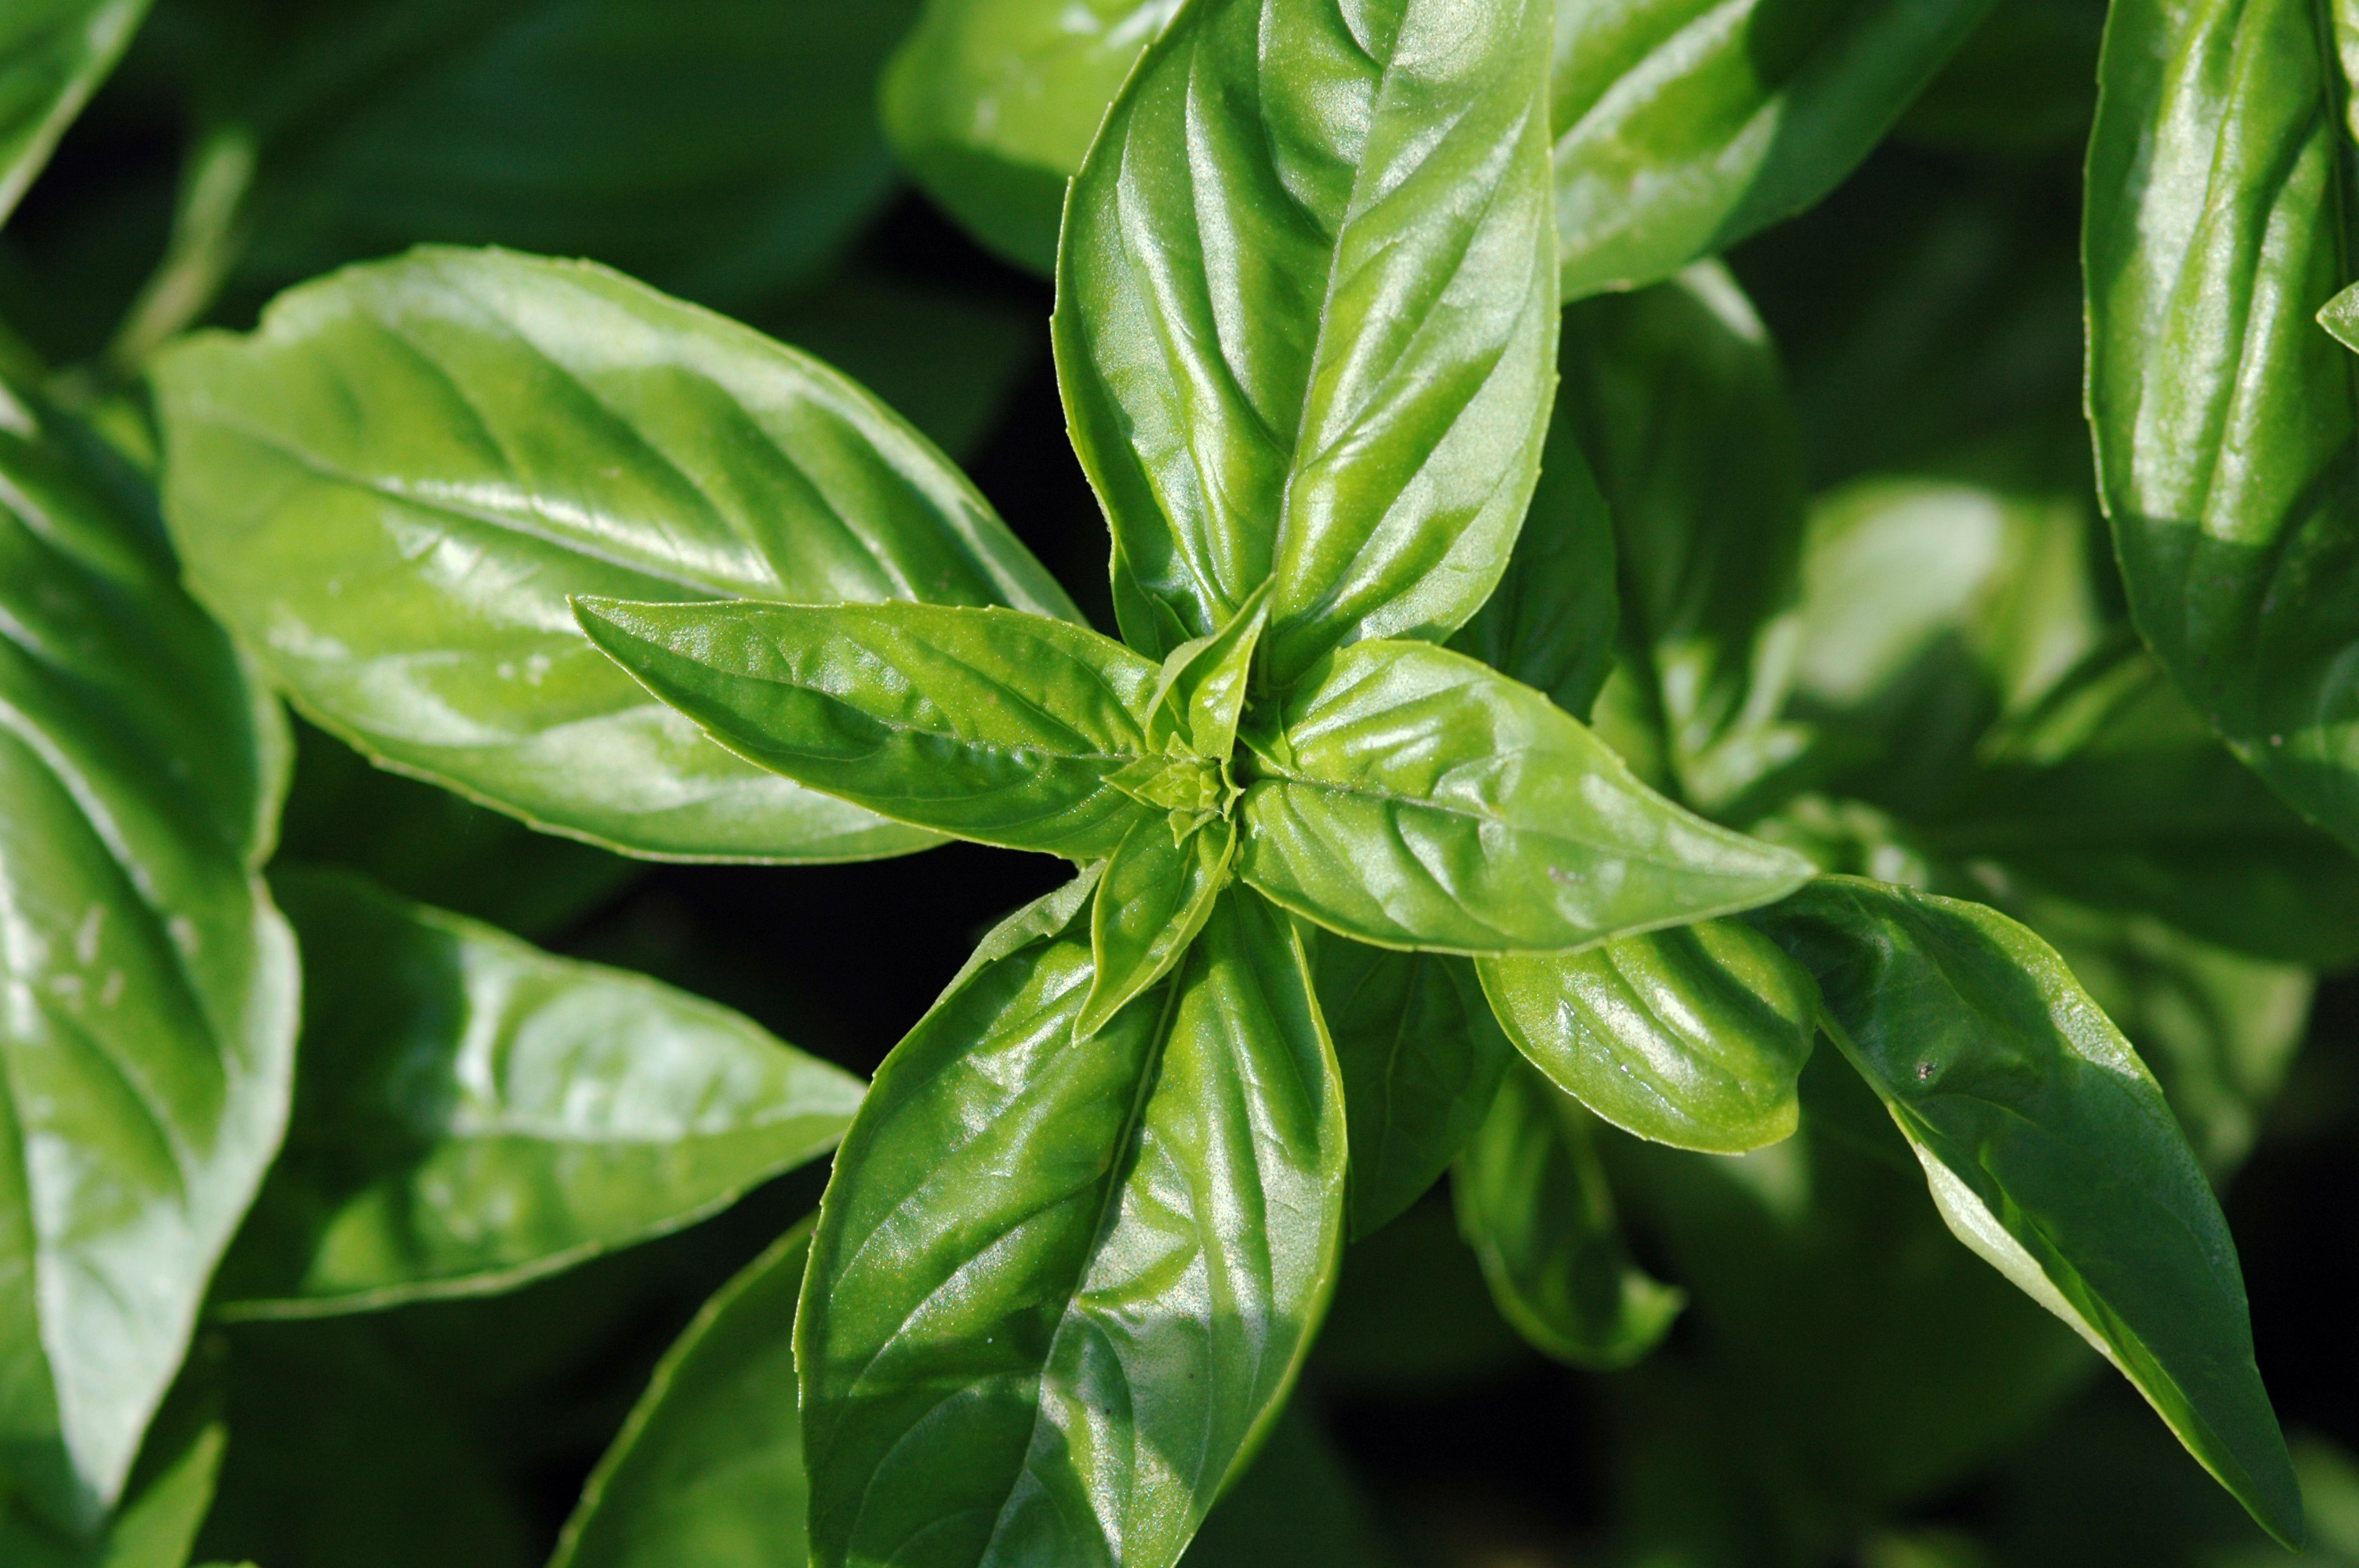 Basil leaves on the plant.